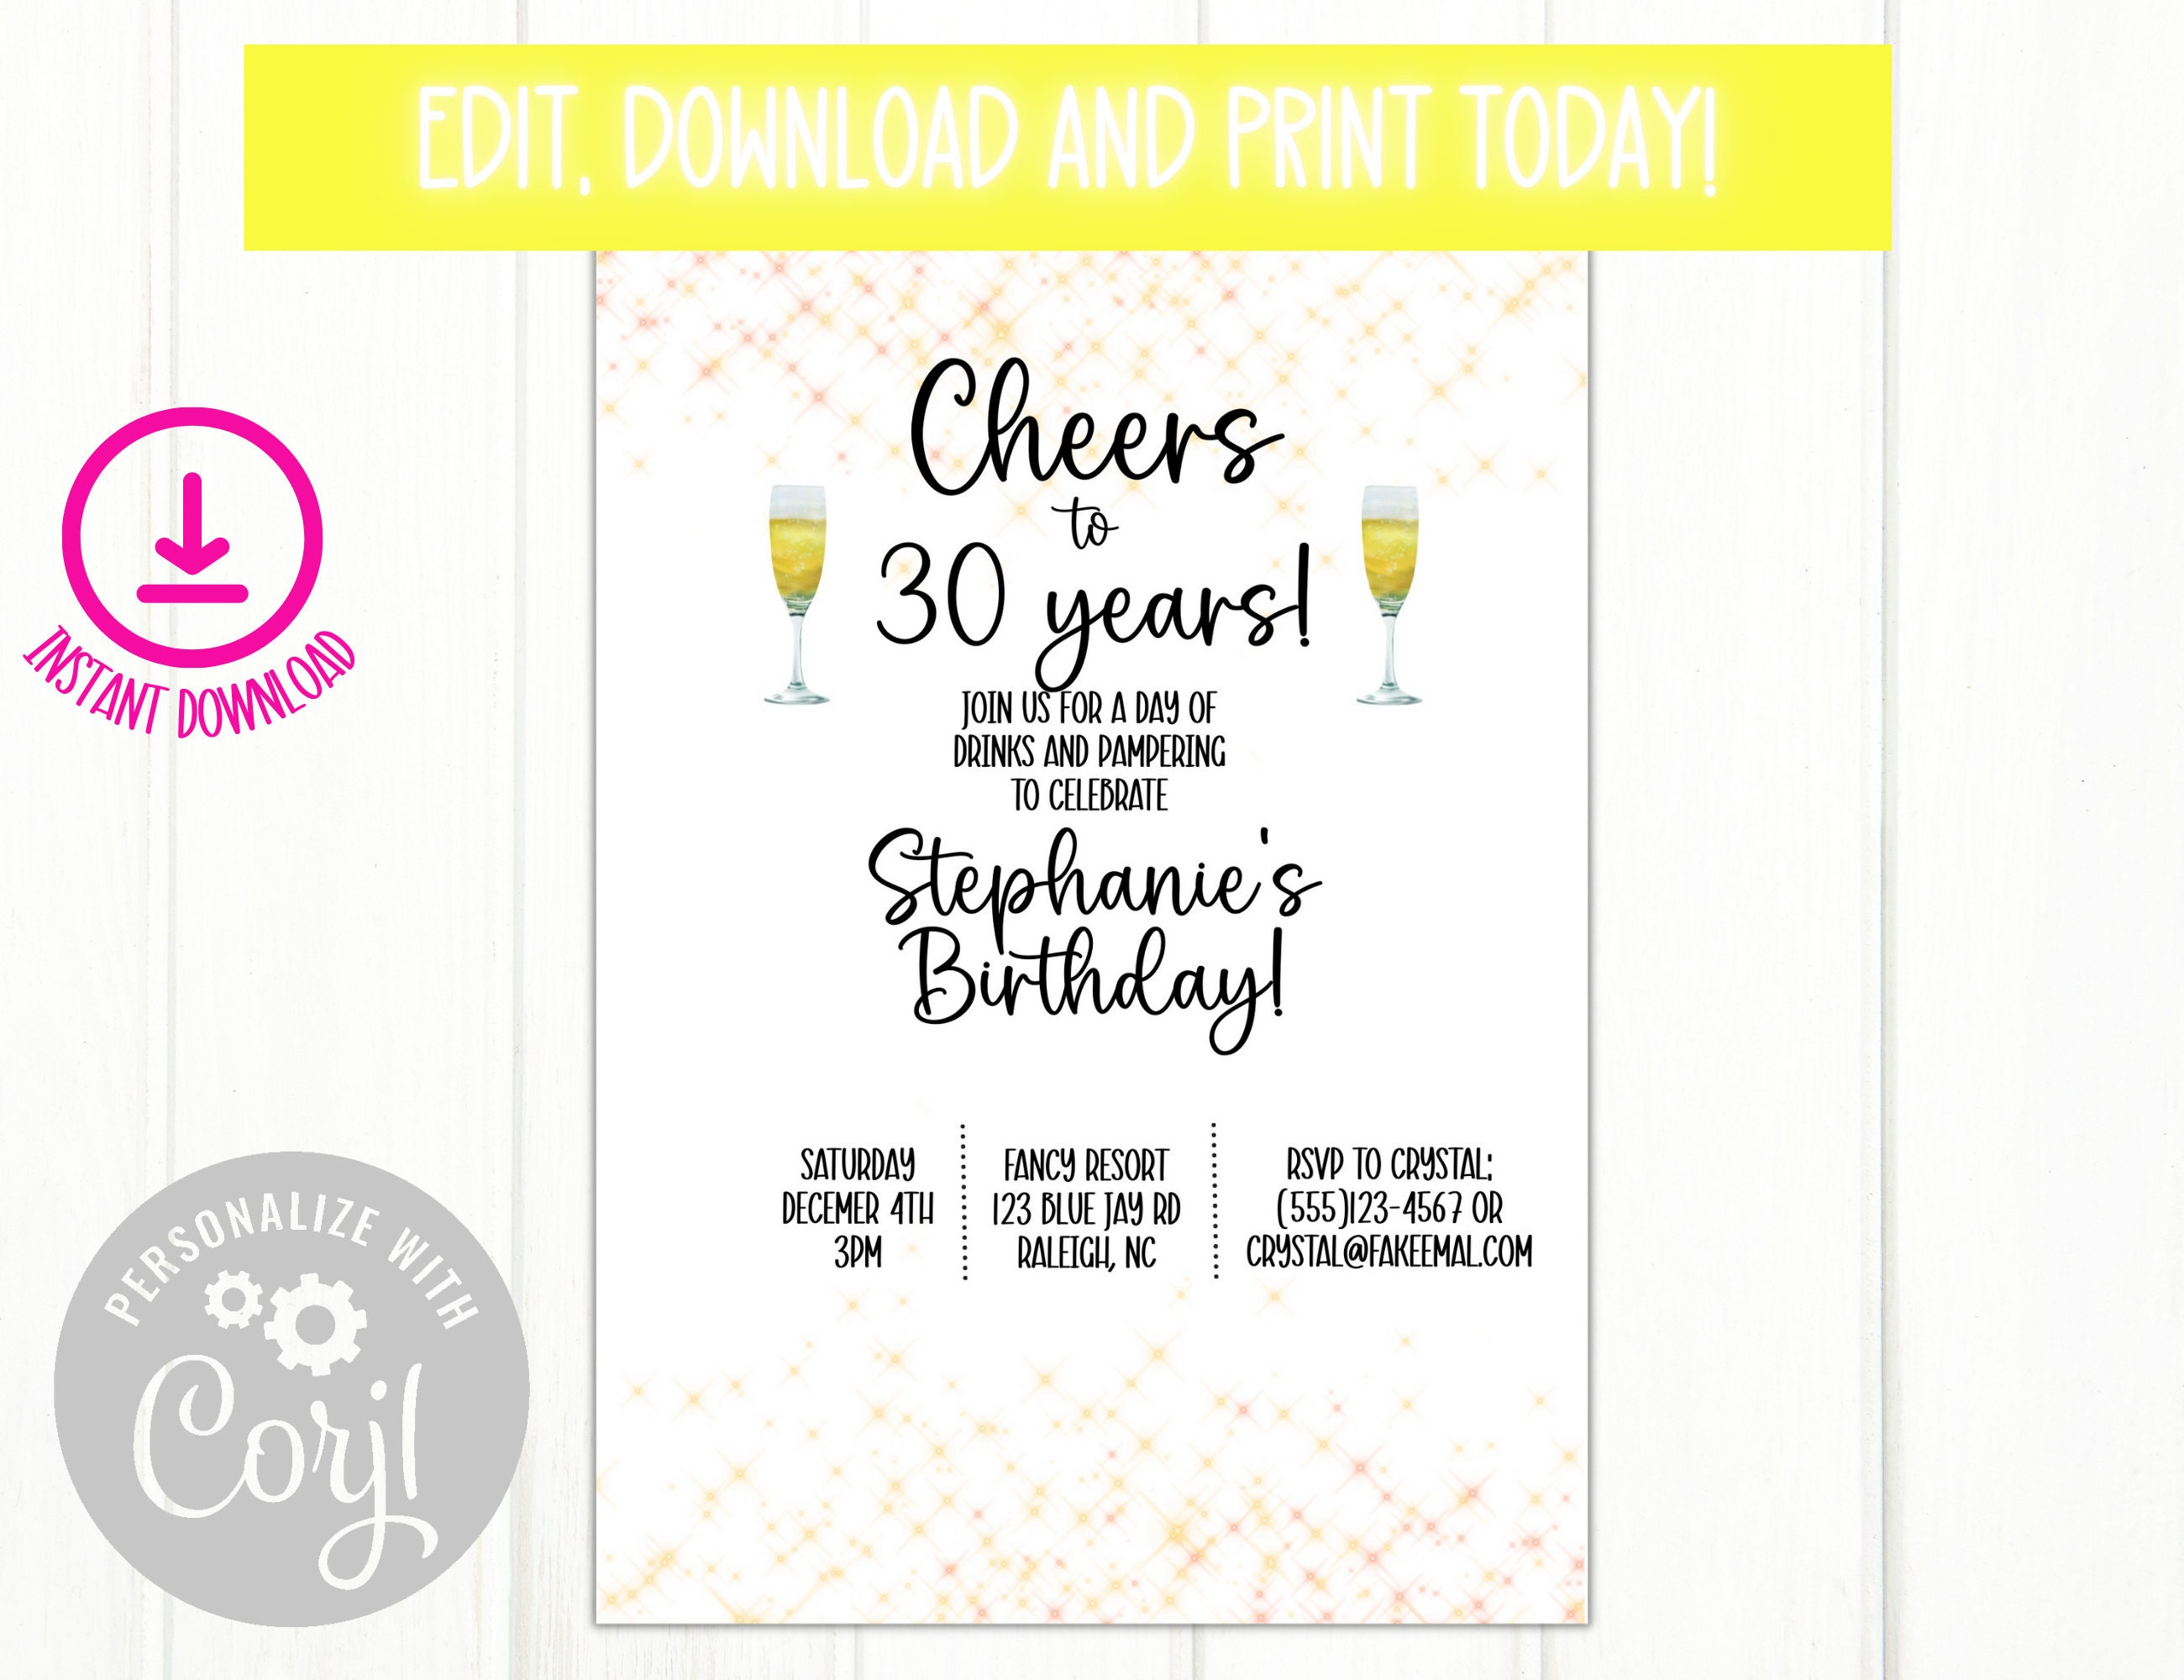 It's A Party - Fill-in Party Invitations